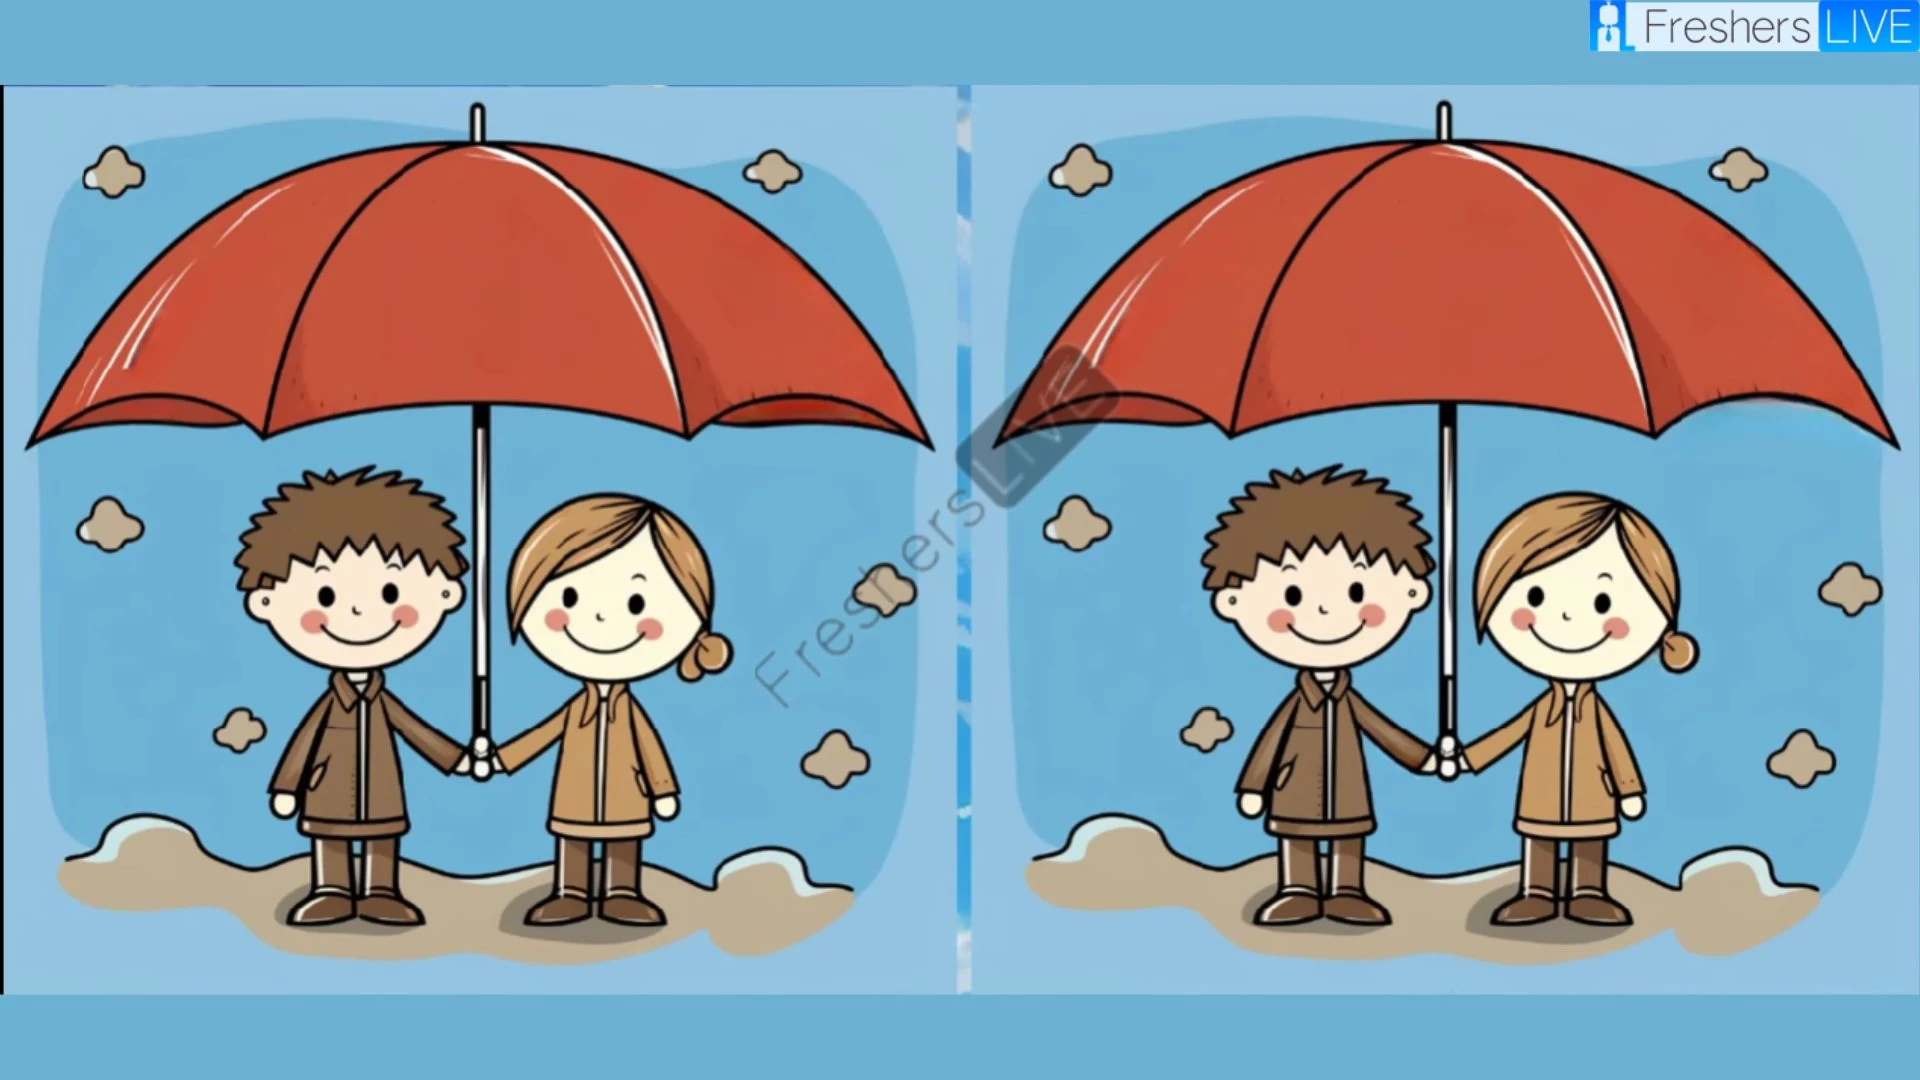 How keen is your perception? Can you Find 3 differences in these pictures in just 10 seconds?